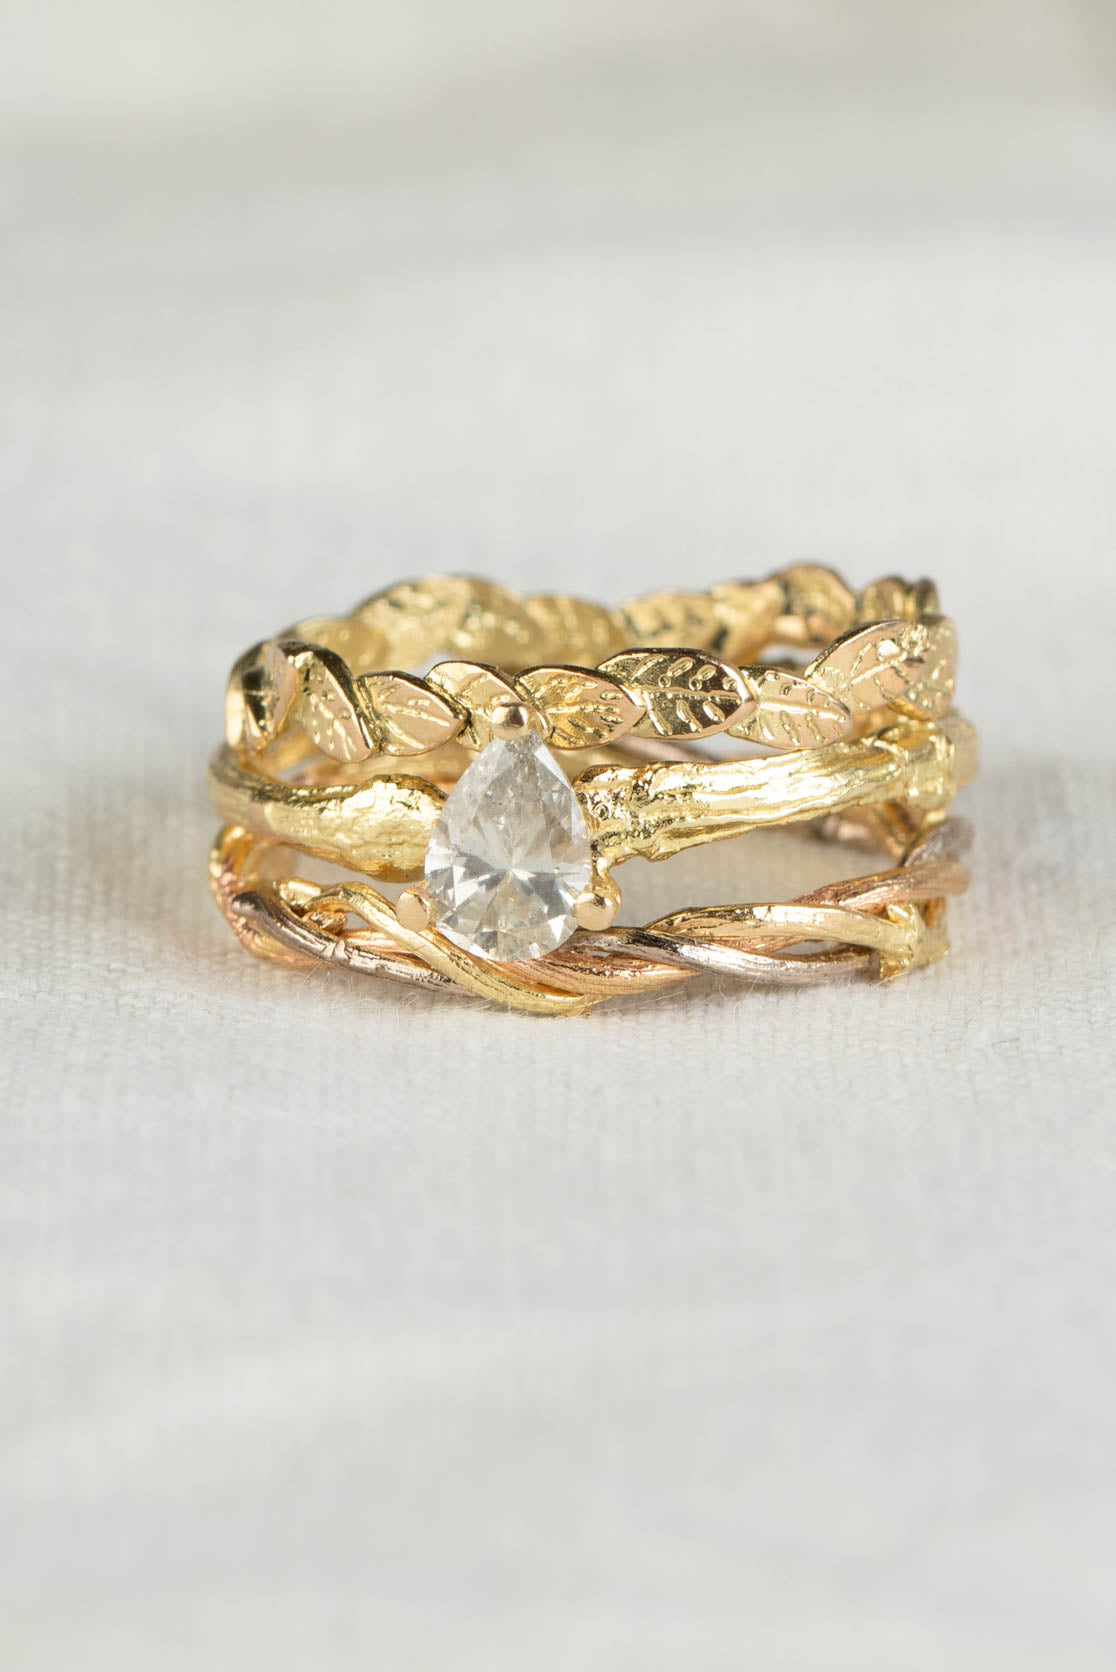 Twig Ring With Three Twisted Twigs In Solid 18ct Yellow, White And Rose Gold